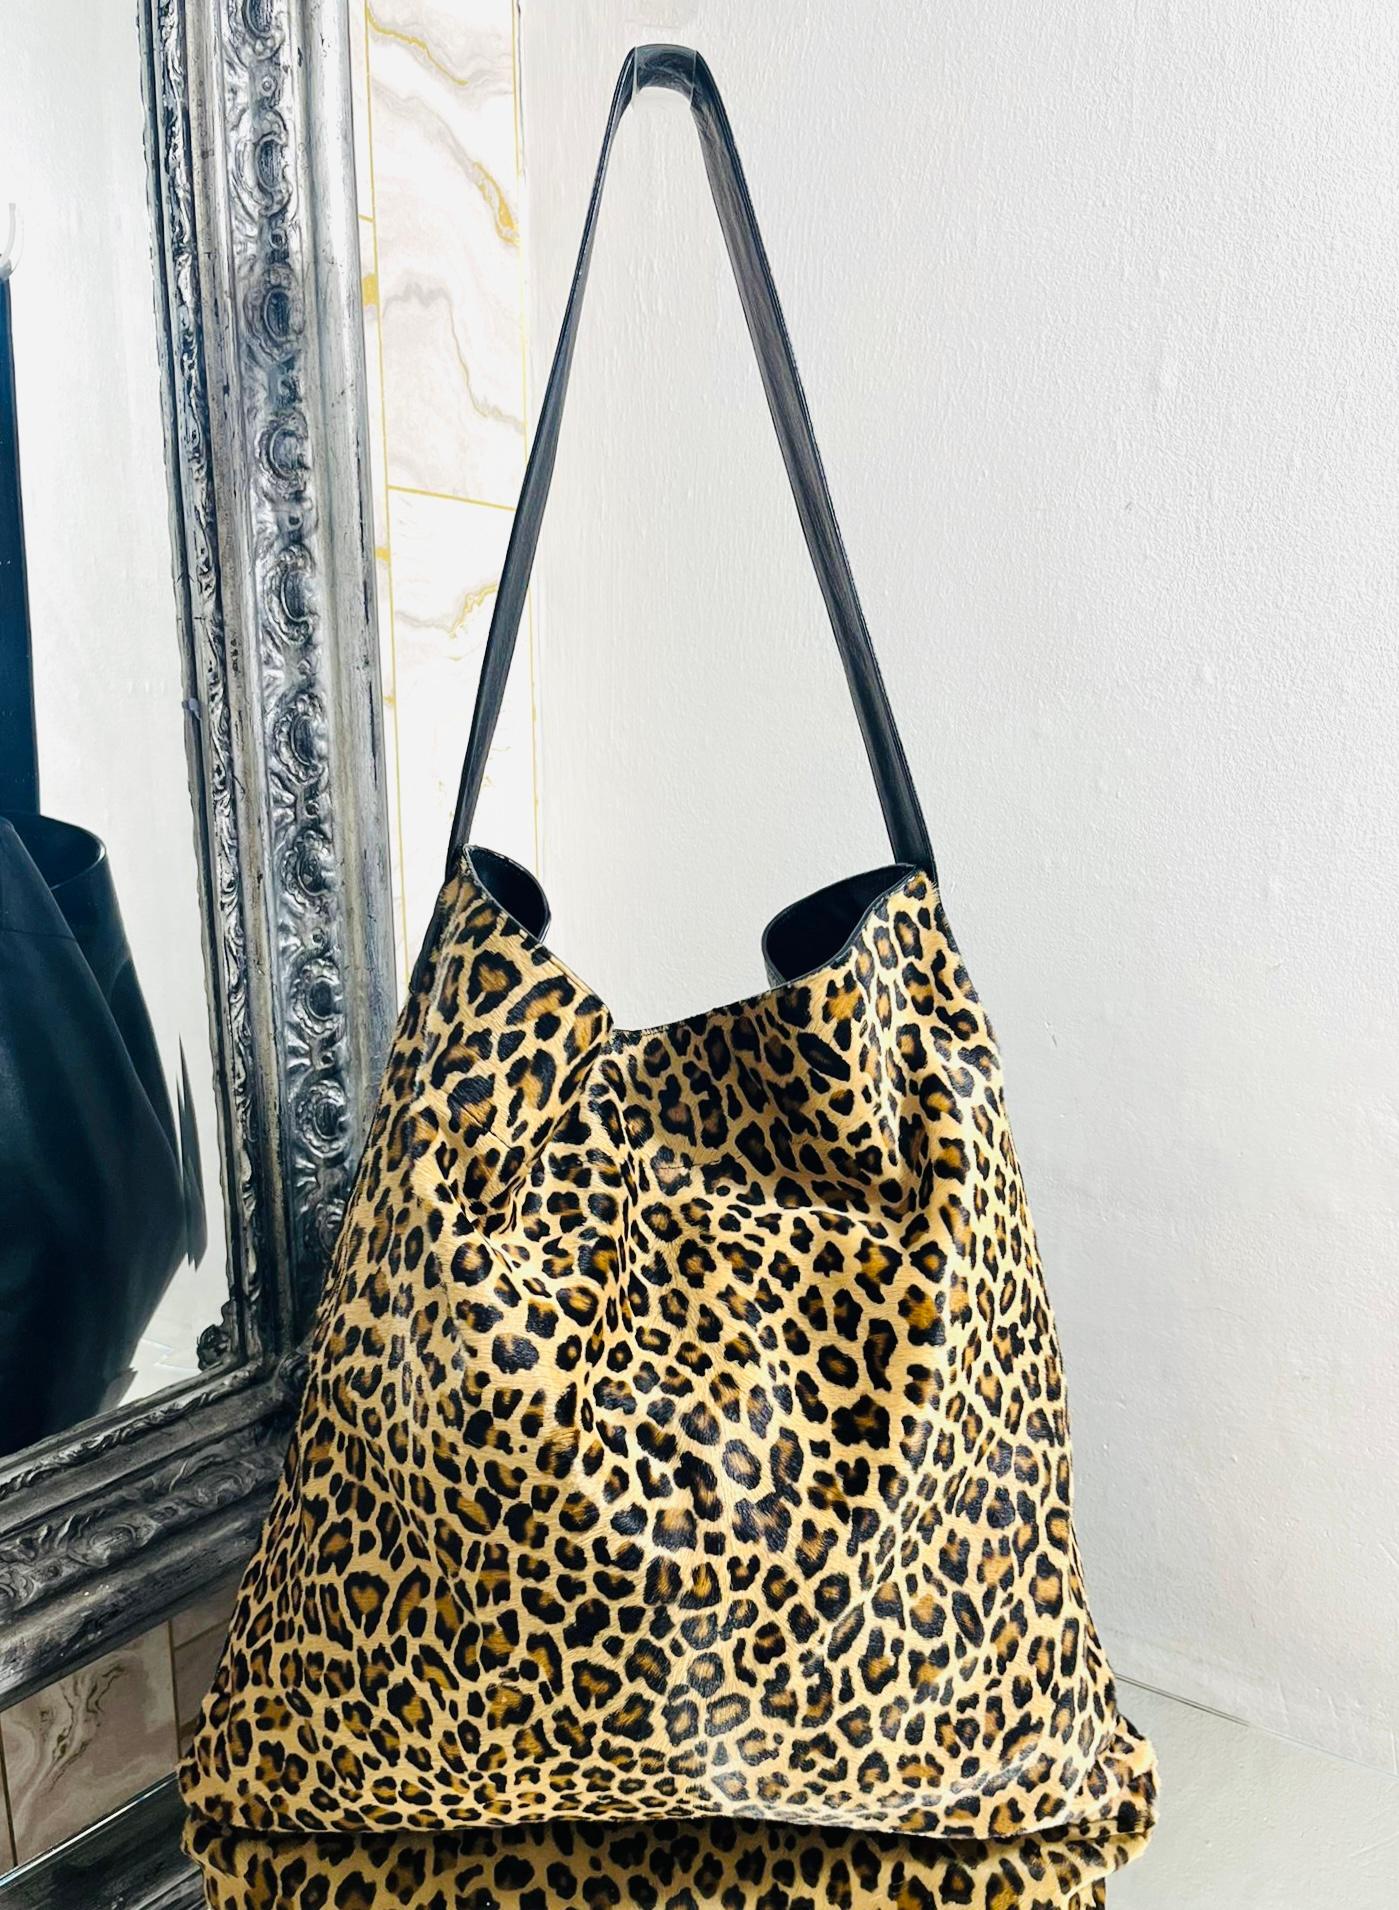 Gerard Darel Lady Pony Skin & Leather Tote Bag

Brown bag designed with leopard print throughout and plain, black leather to rear.

Featuring top leather handle and open top.

Size – Height 38cm, Width 36cm, Depth 5cm

Condition – Very